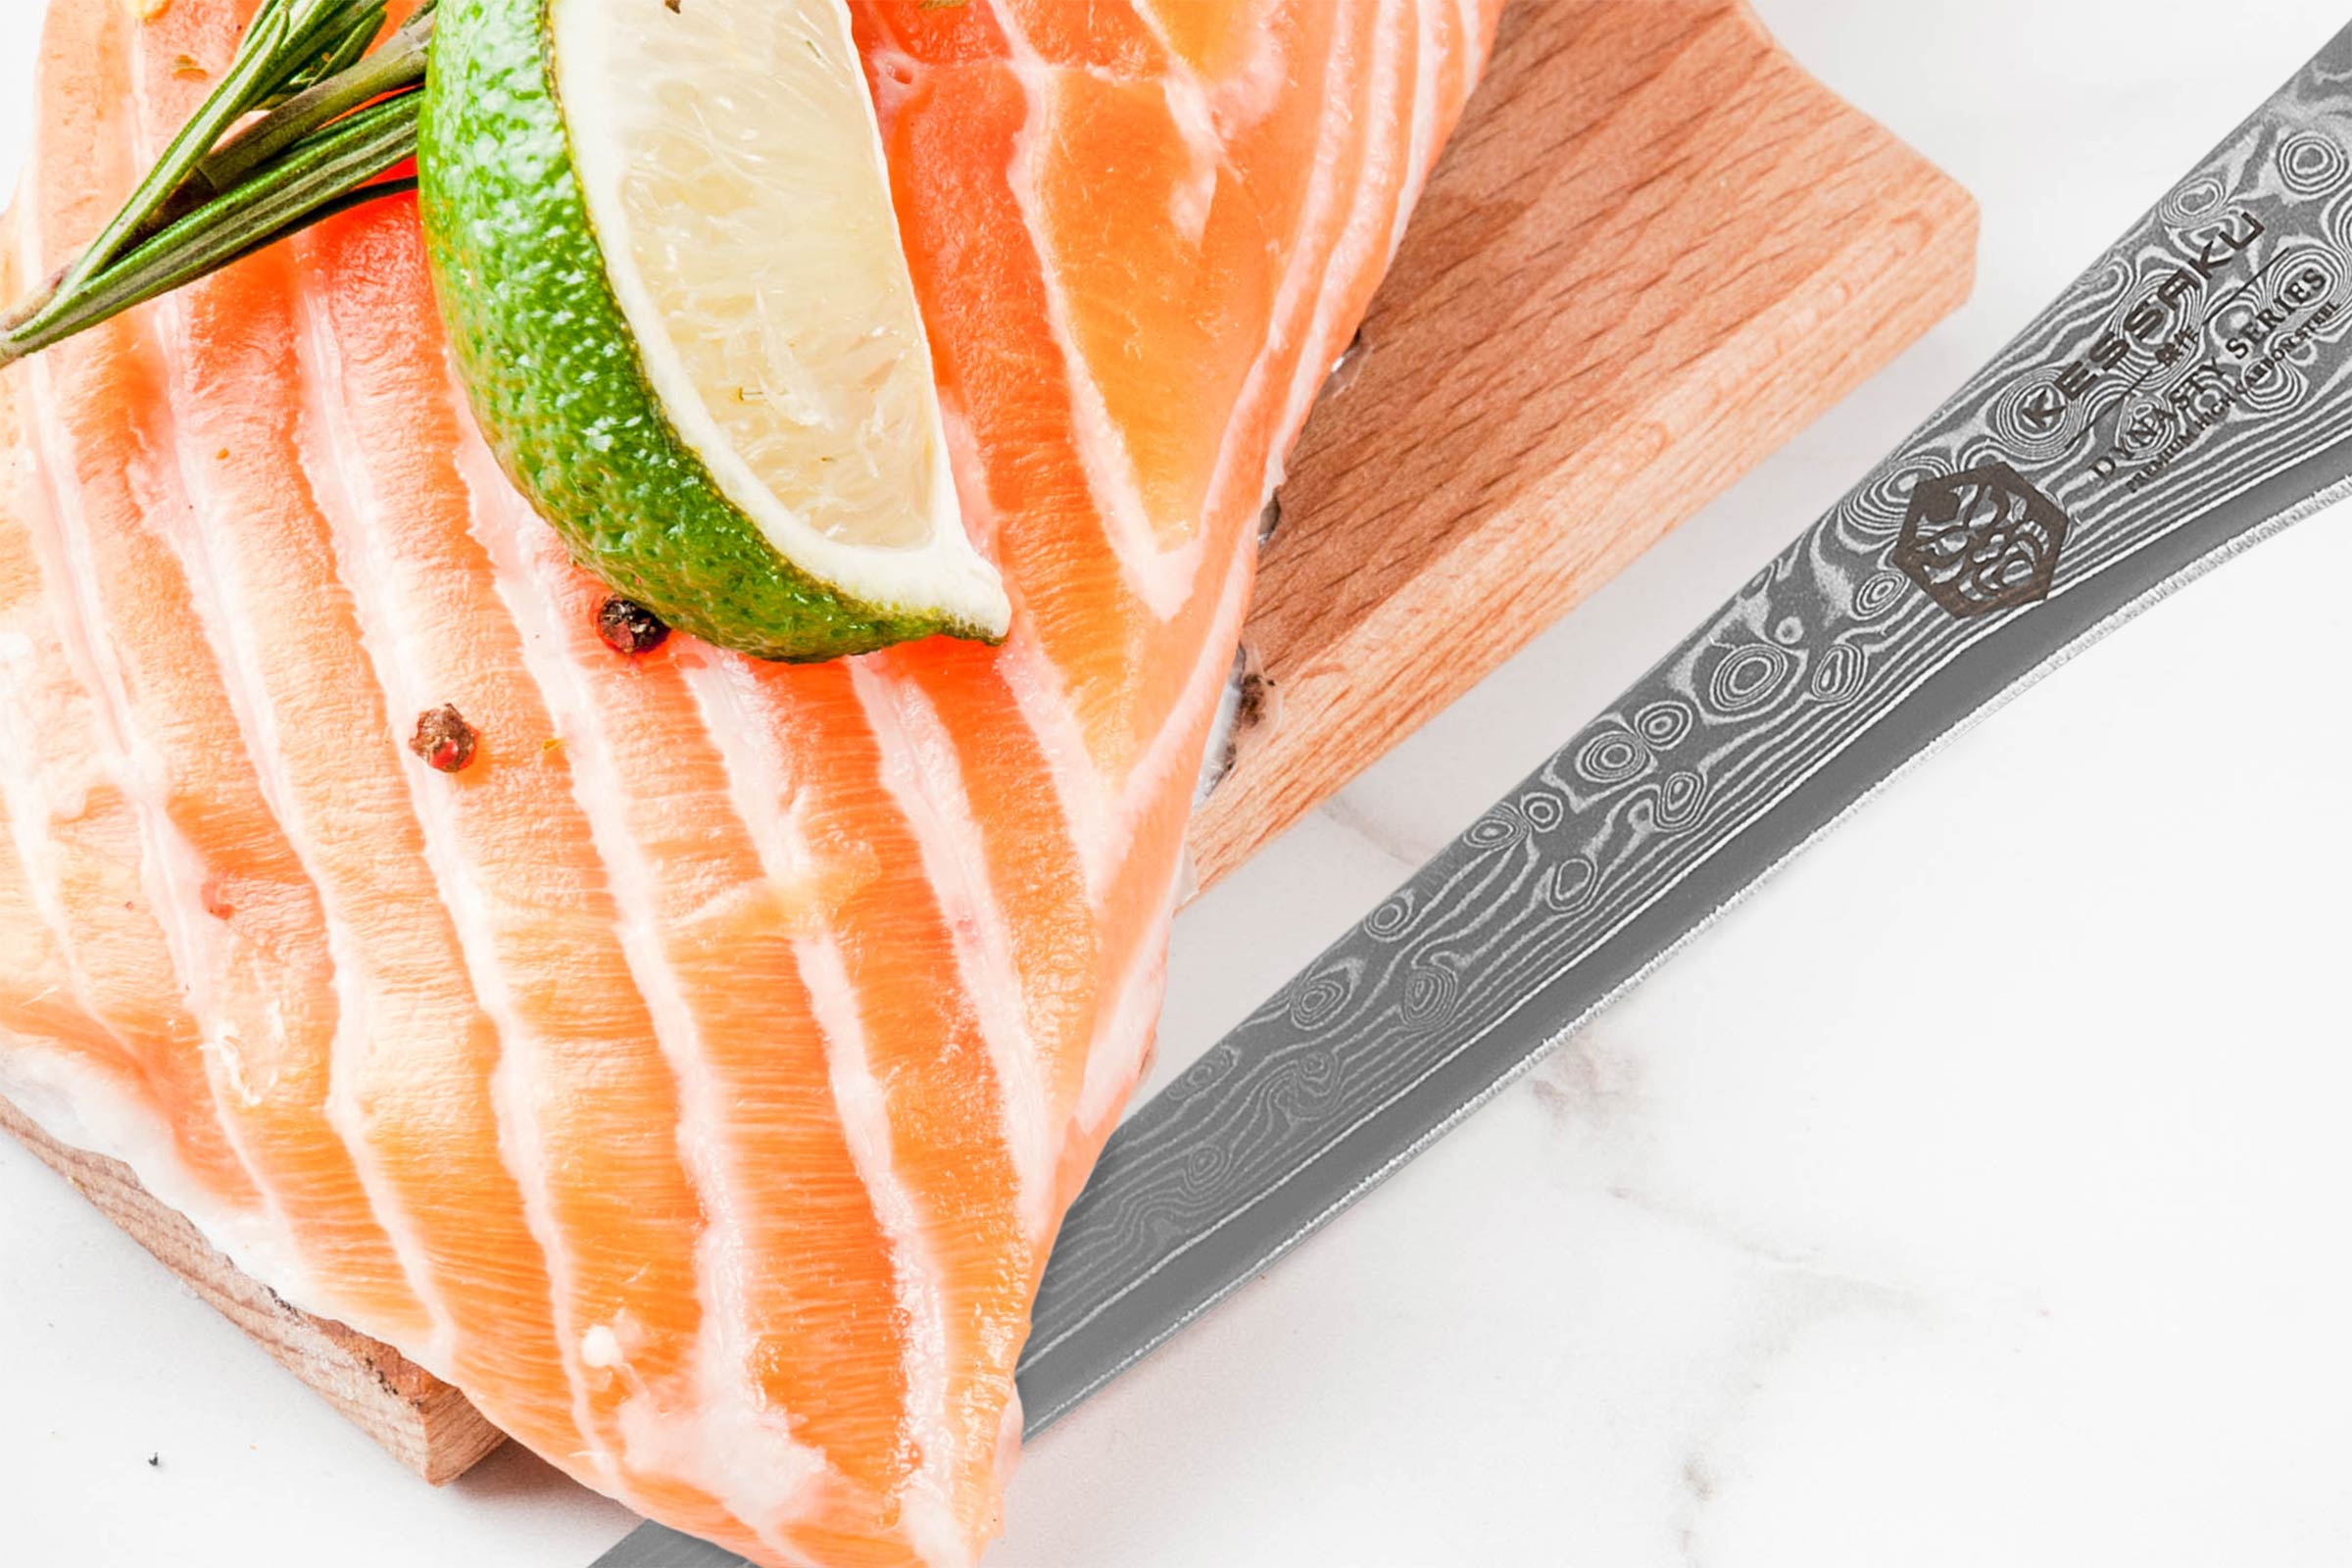 The Kessaku Dynasty Damascus Fillet Knife next to a salmon steak with a wedge of lime.